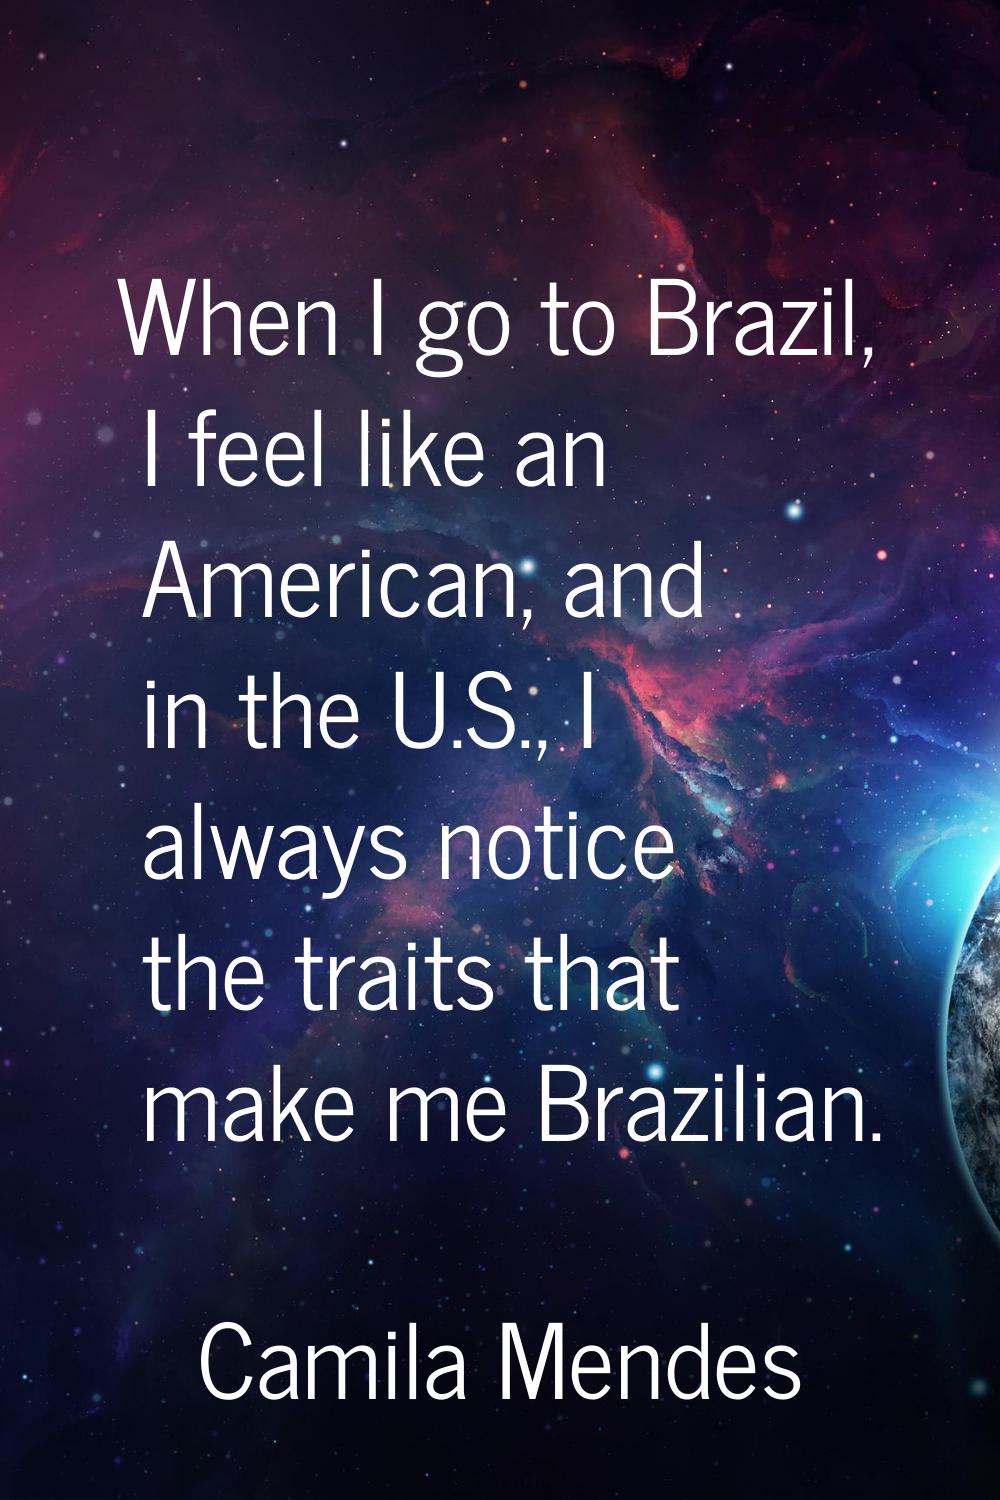 When I go to Brazil, I feel like an American, and in the U.S., I always notice the traits that make